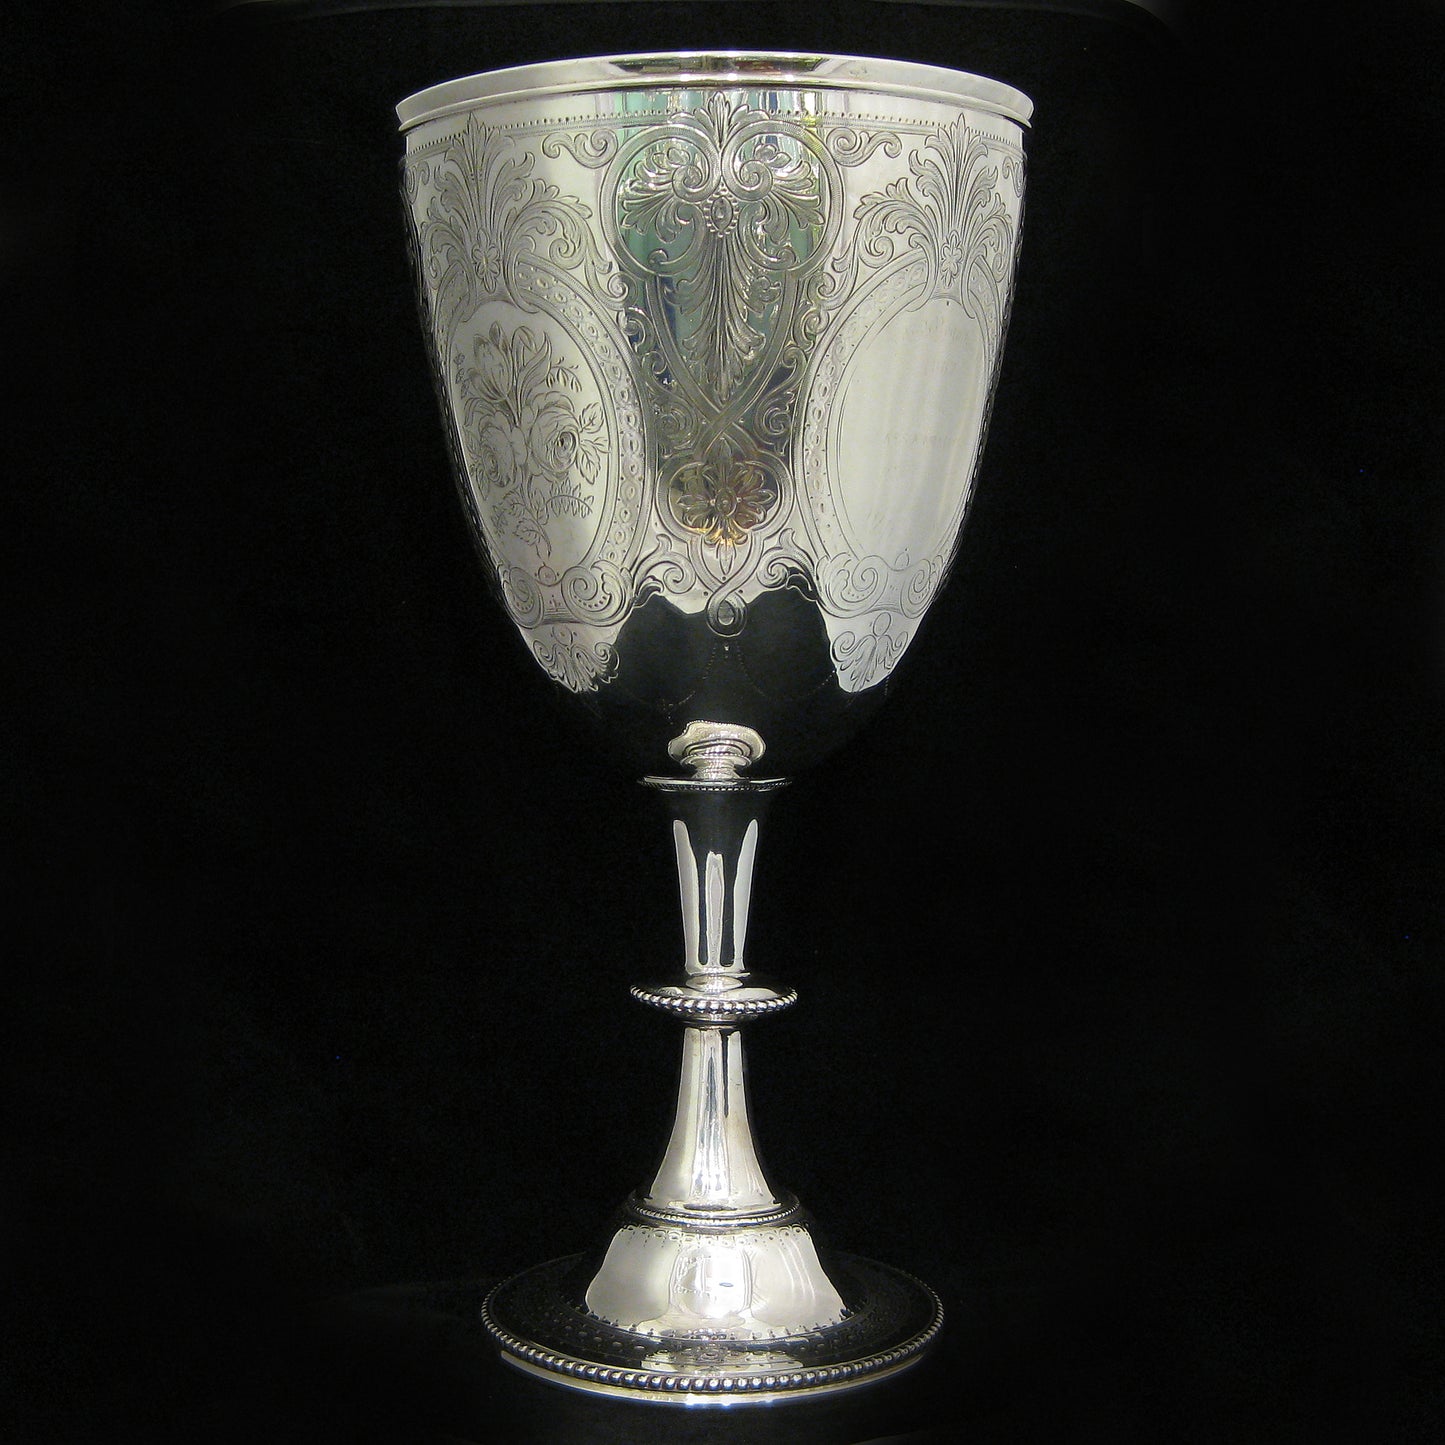 A stunning silver trophy cup